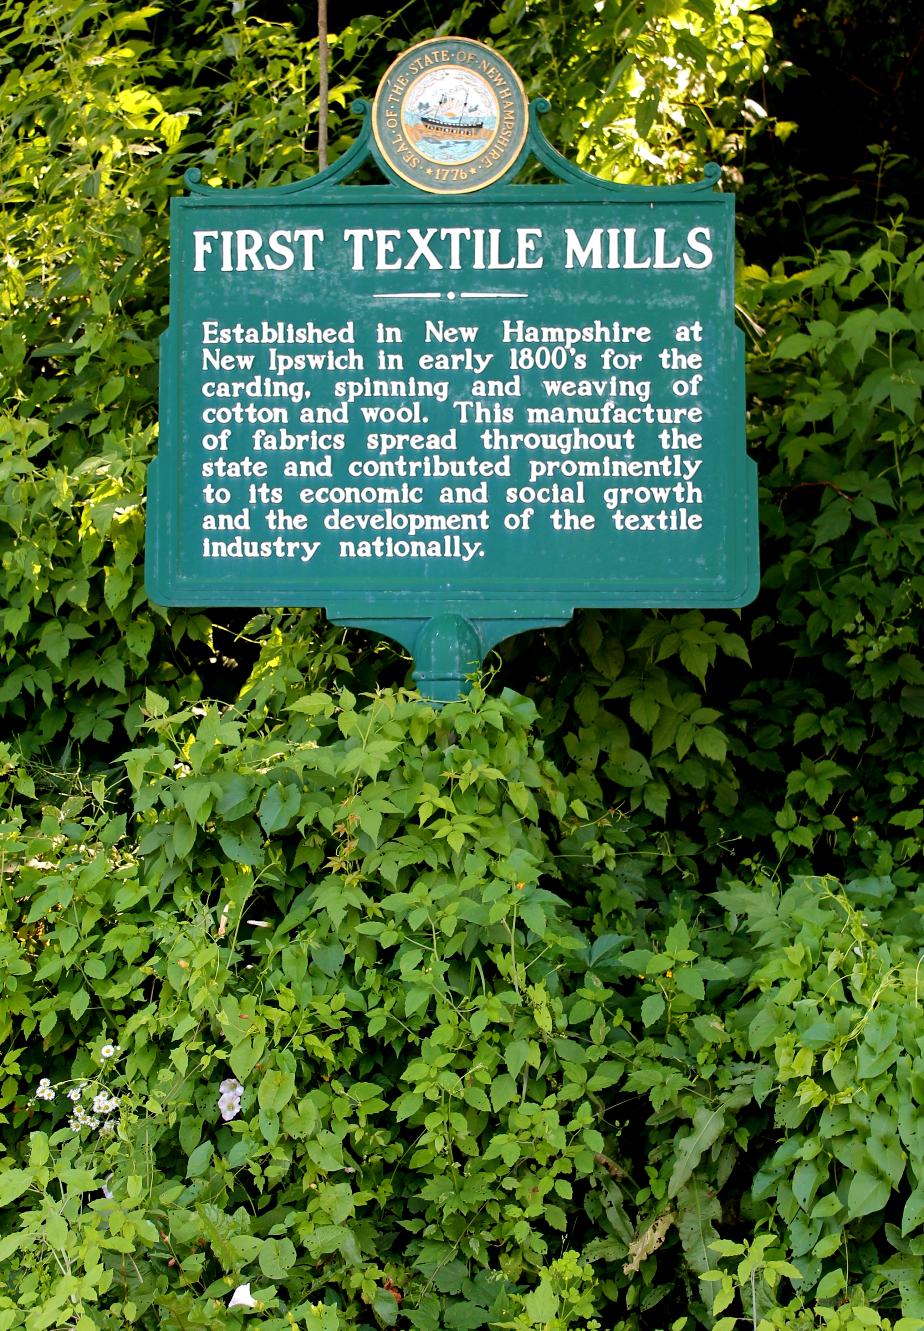 First Textile Mills - New Ipswich New Hampshire